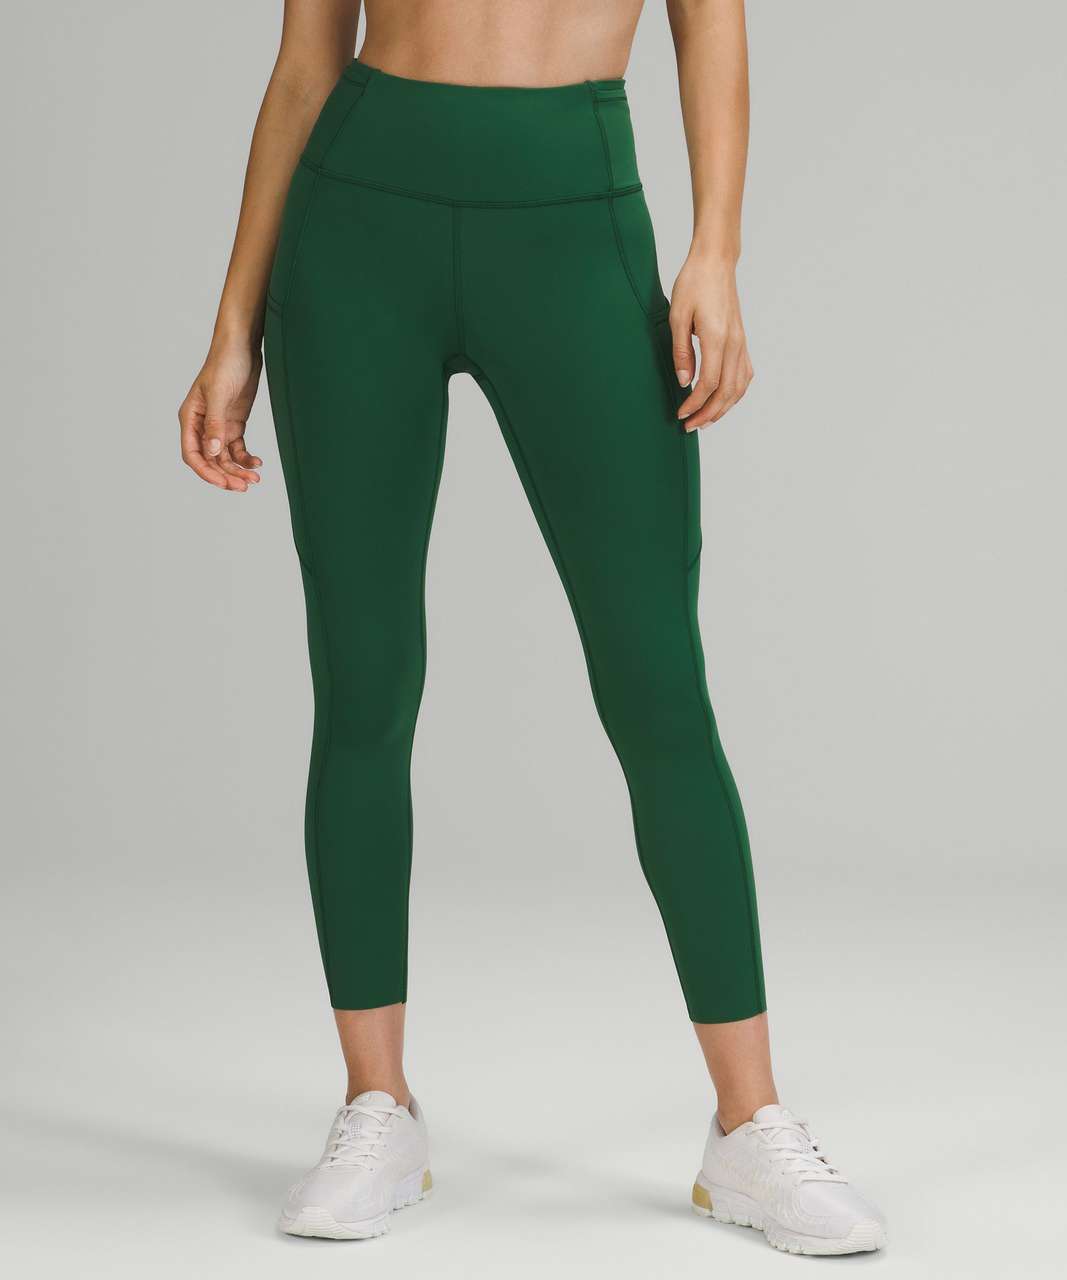 Lululemon Fast and Free High-Rise Tight 25" - Everglade Green